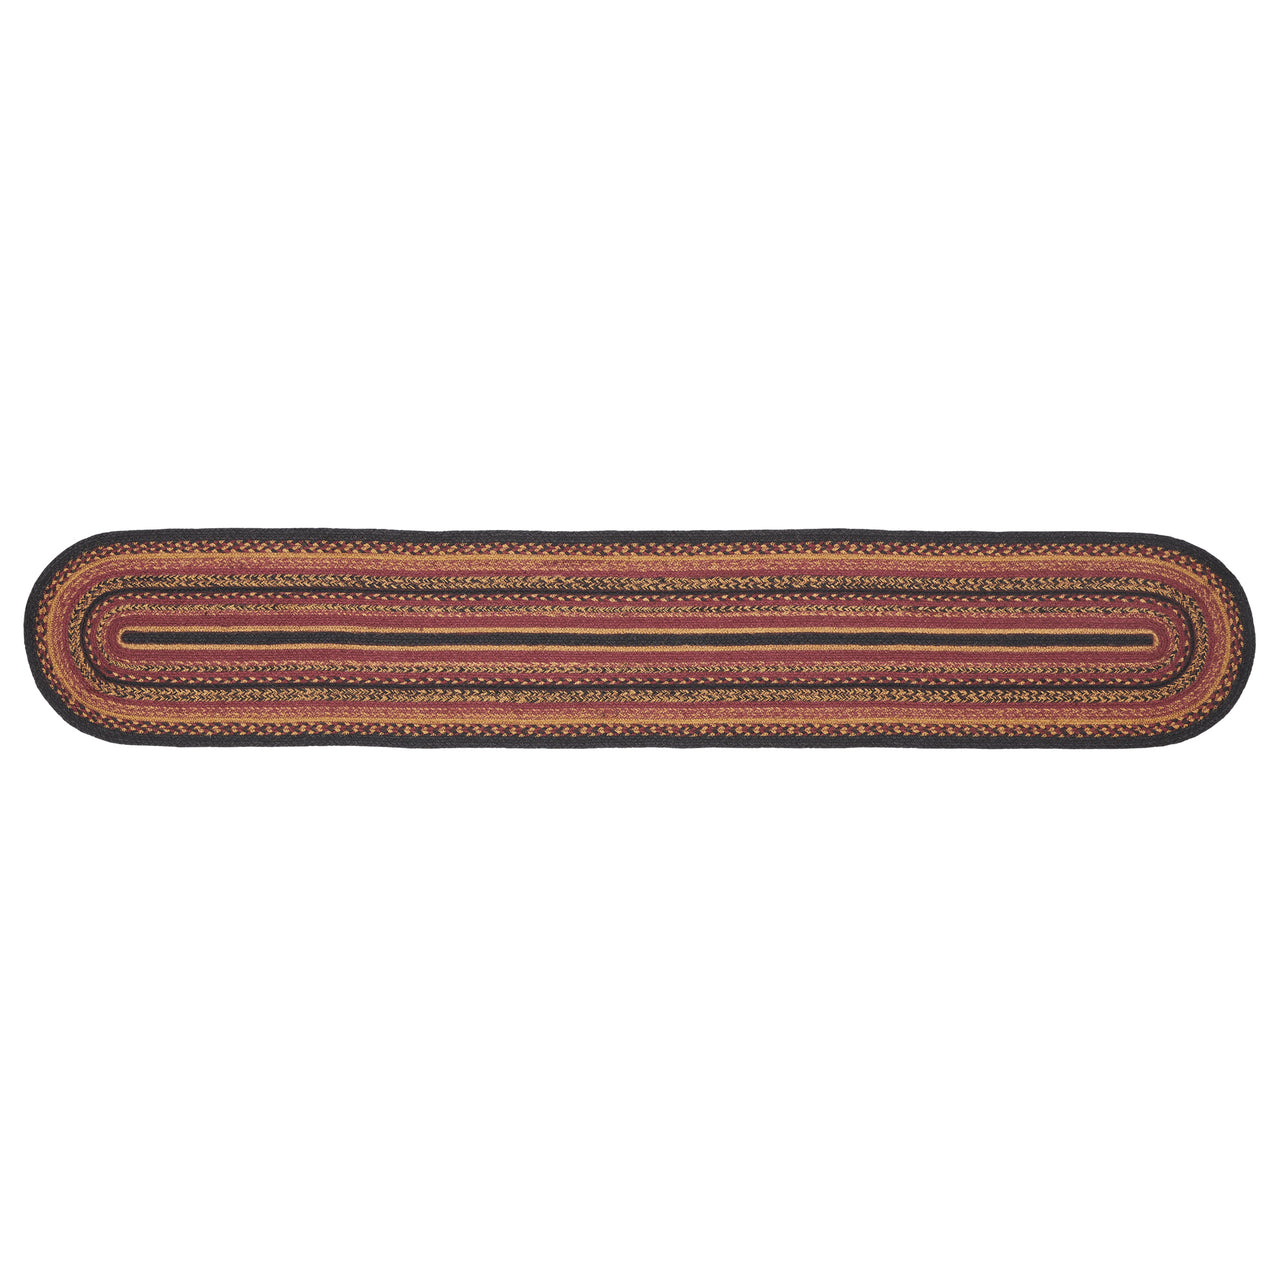 Heritage Farms Jute Oval Runner 13x72 VHC Brands